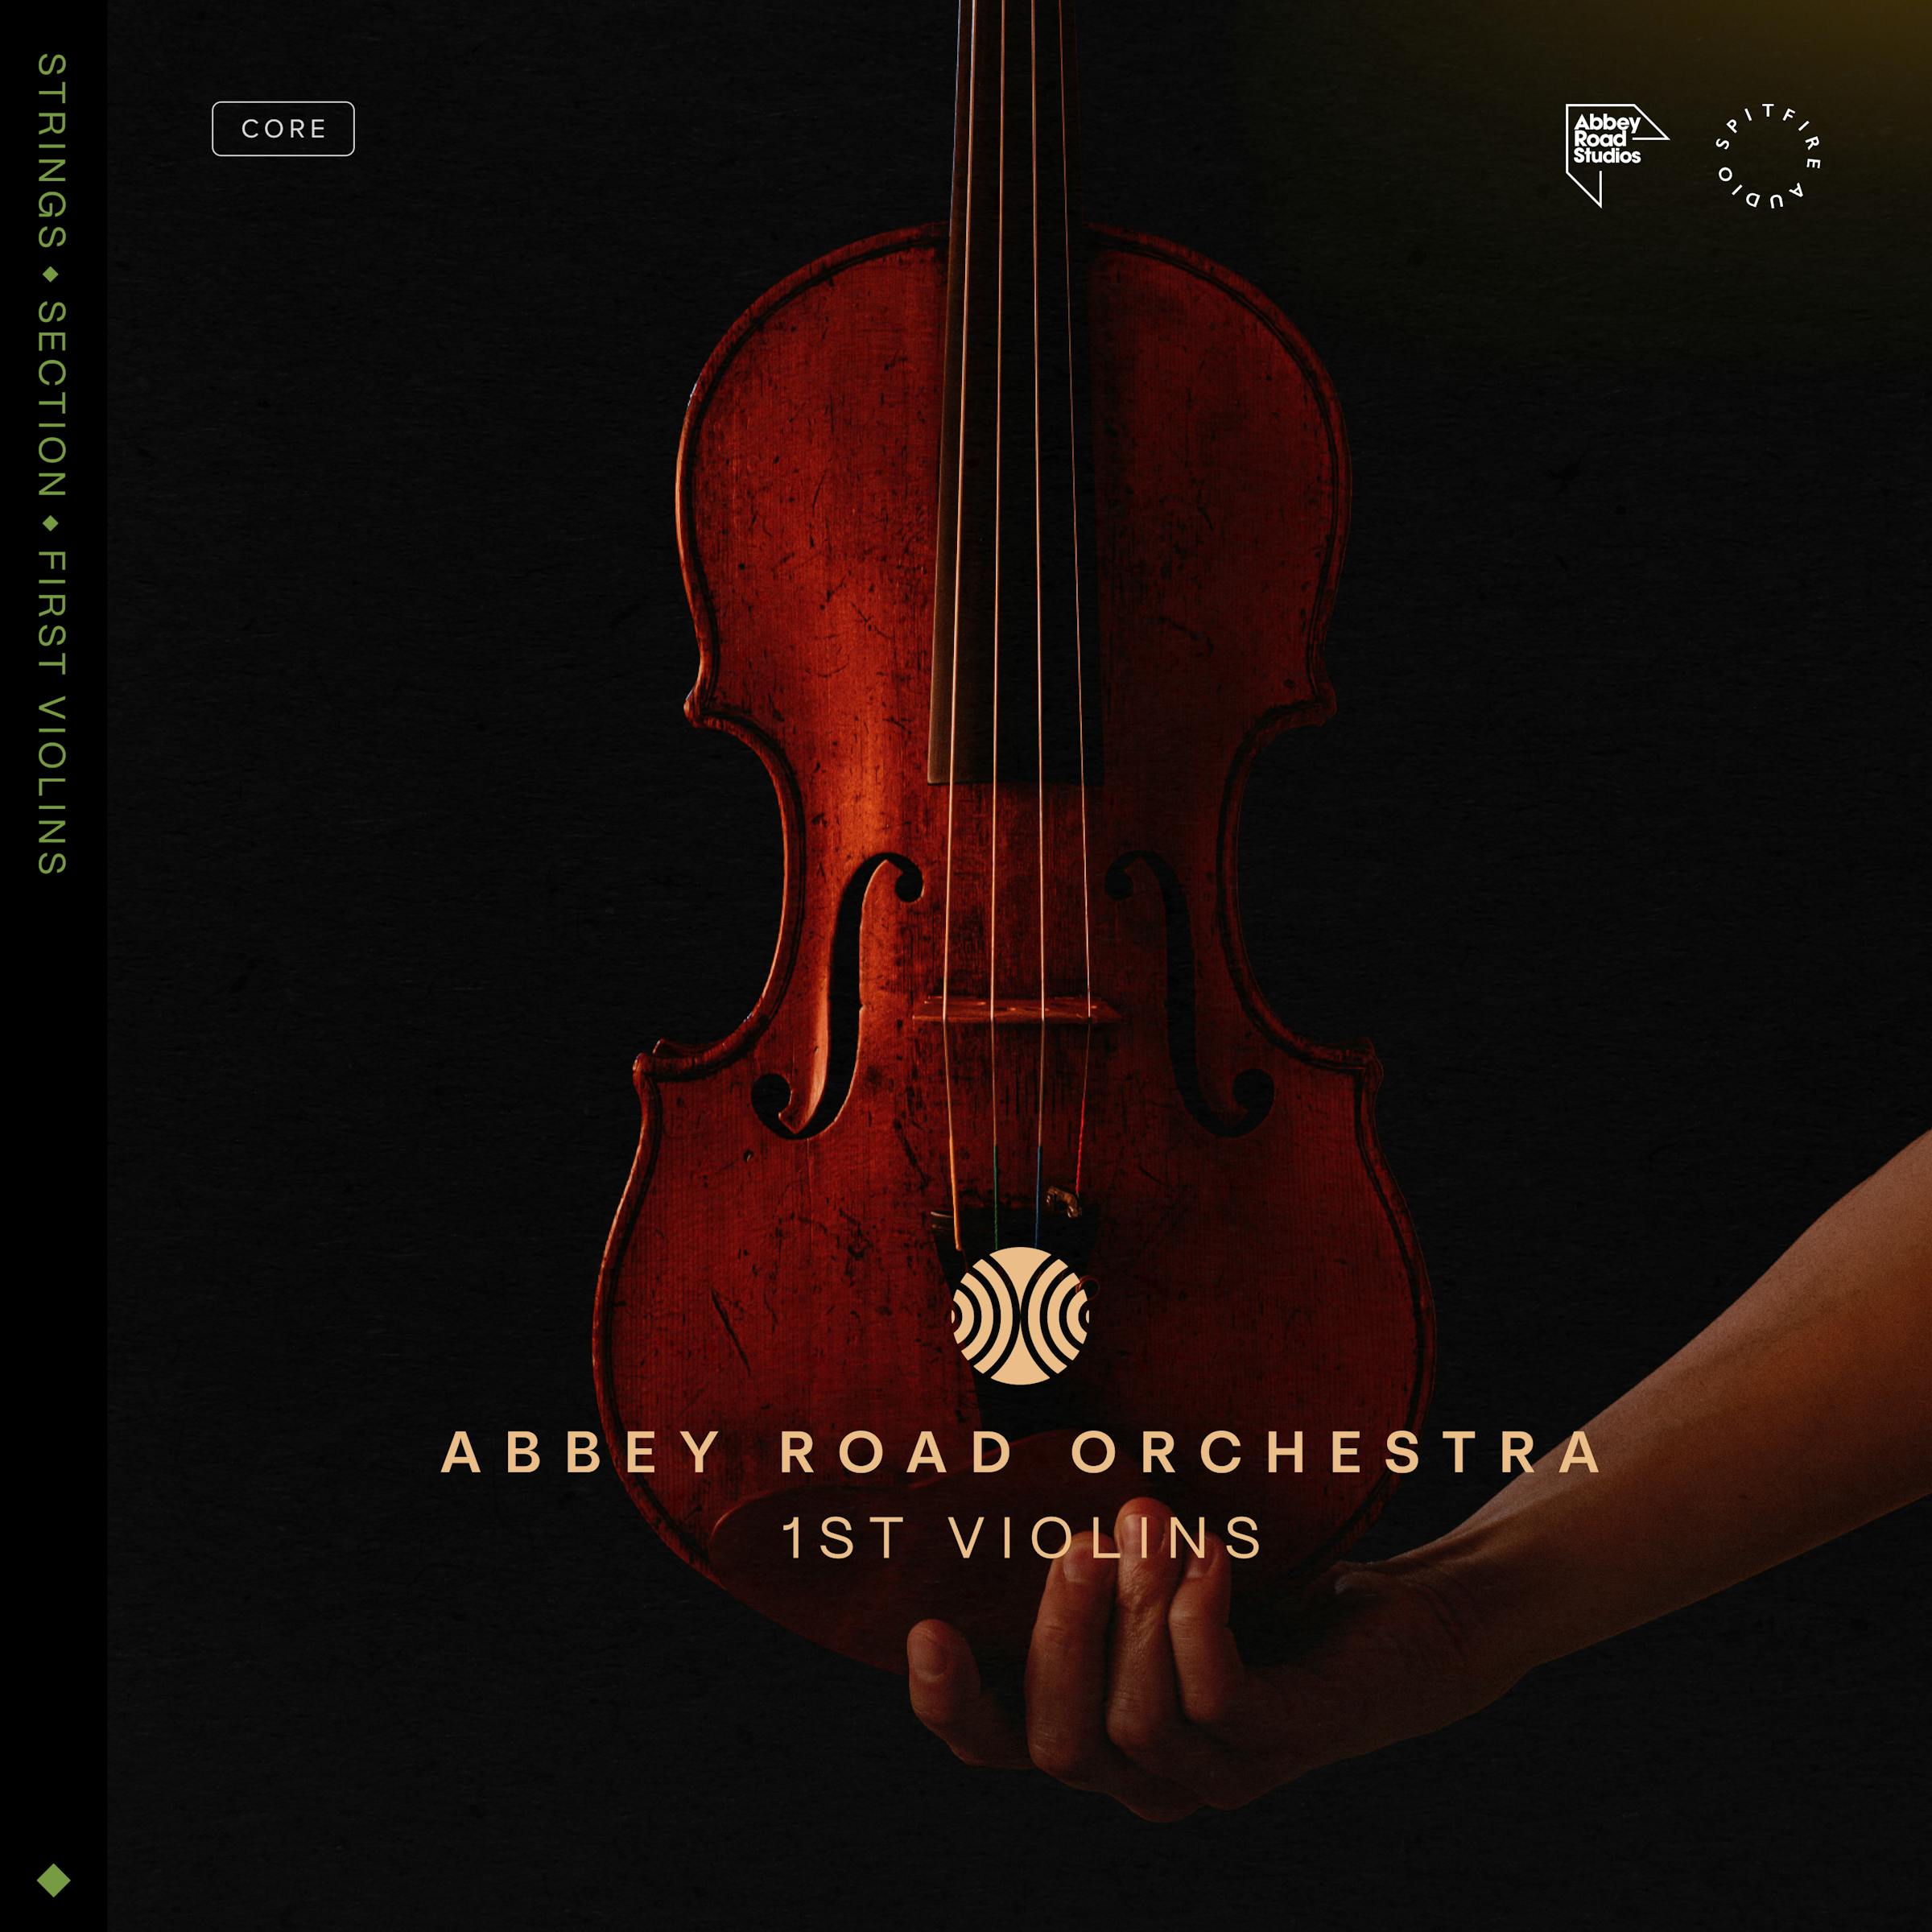 Abbey Road Orchestra: 1st Violins Core artwork. A hand holding up a violin over a black background.